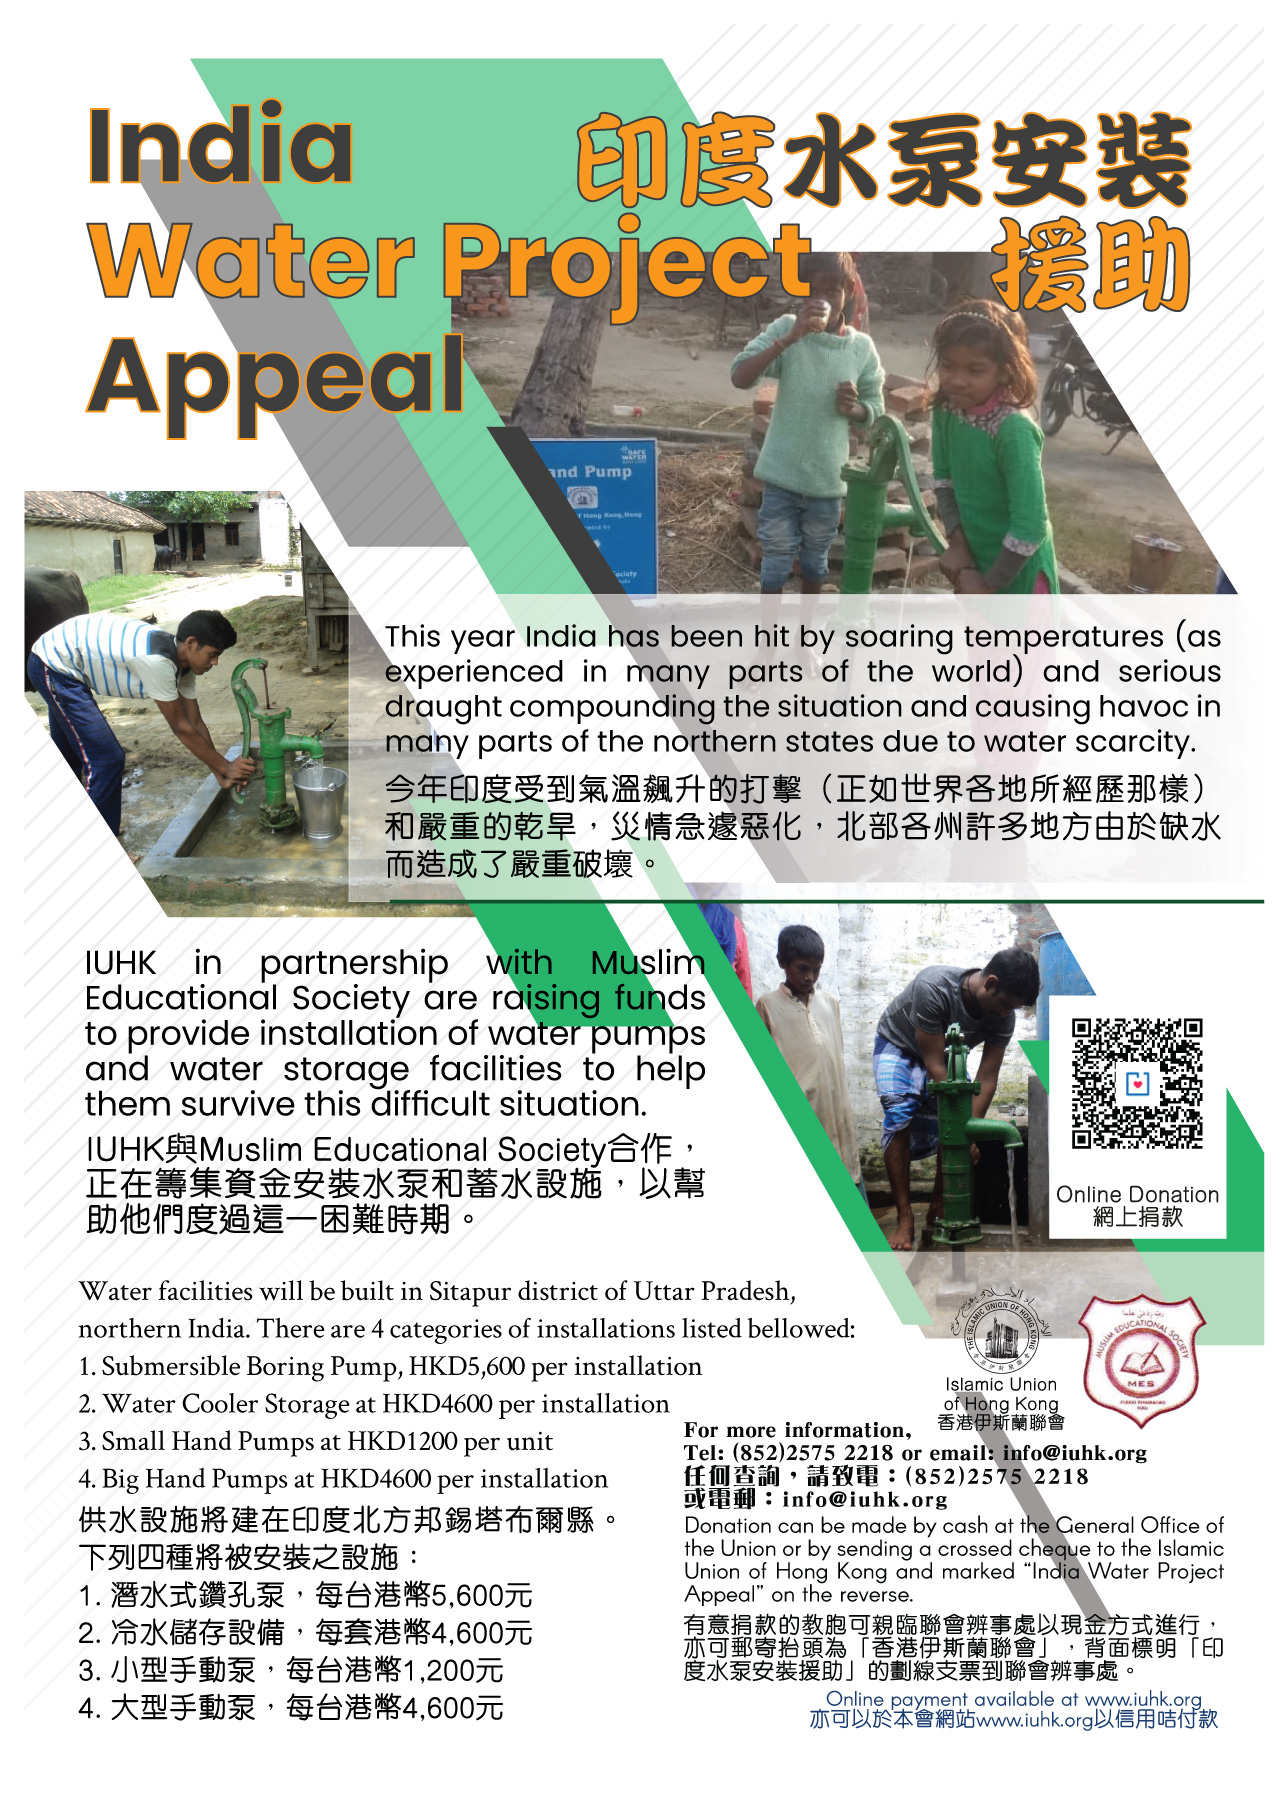 India Water Project Appeal